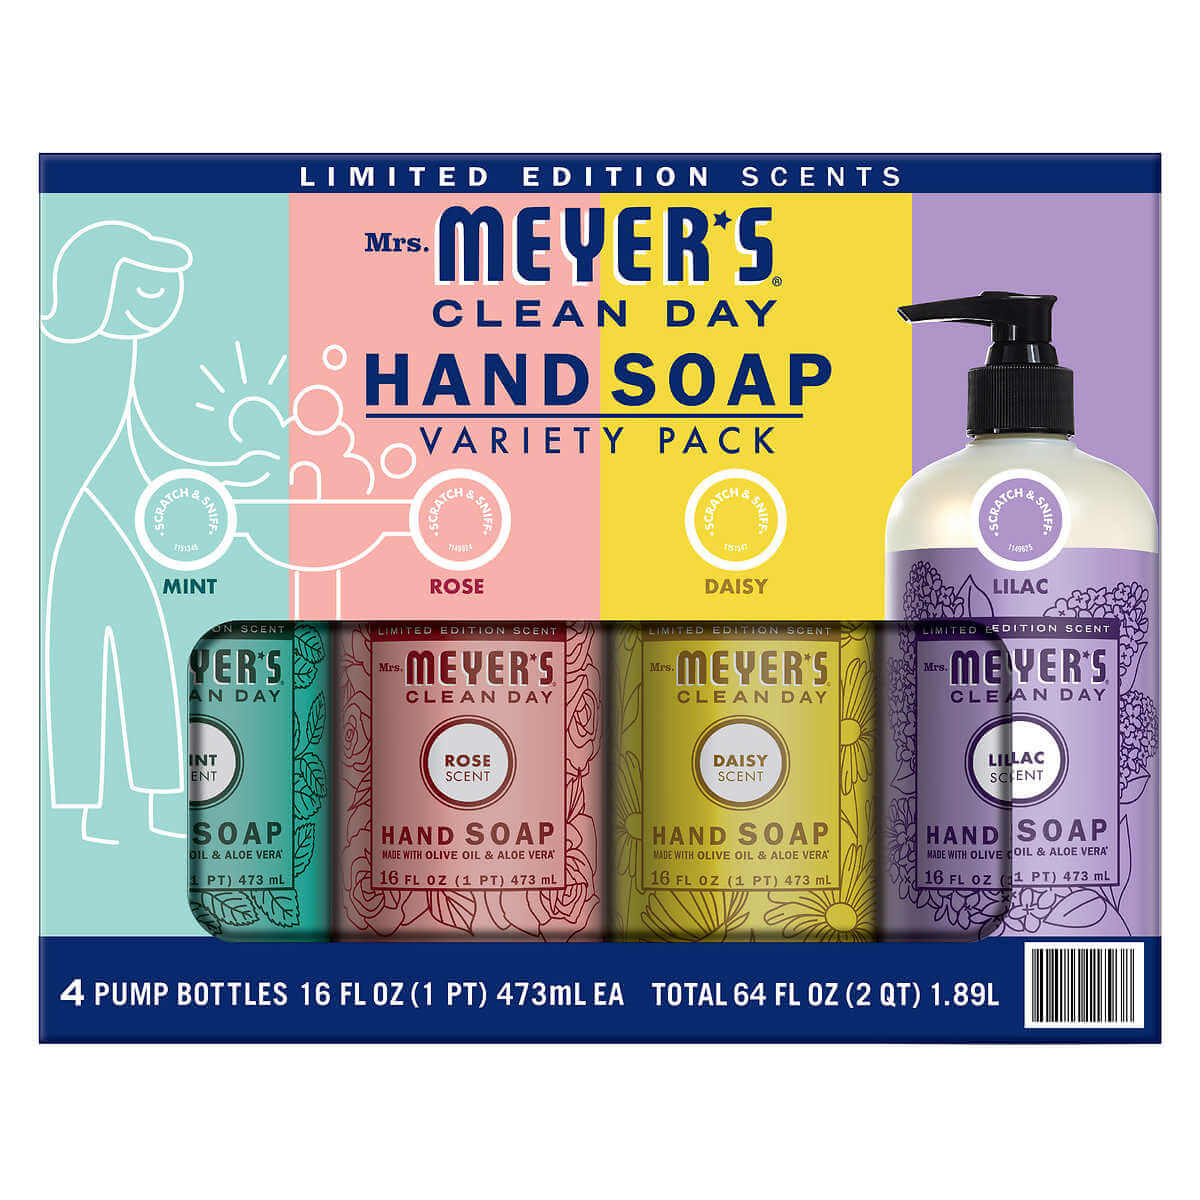 Mrs. Meyer's Clean Day Hand Soap 16 fl oz - 4-pack